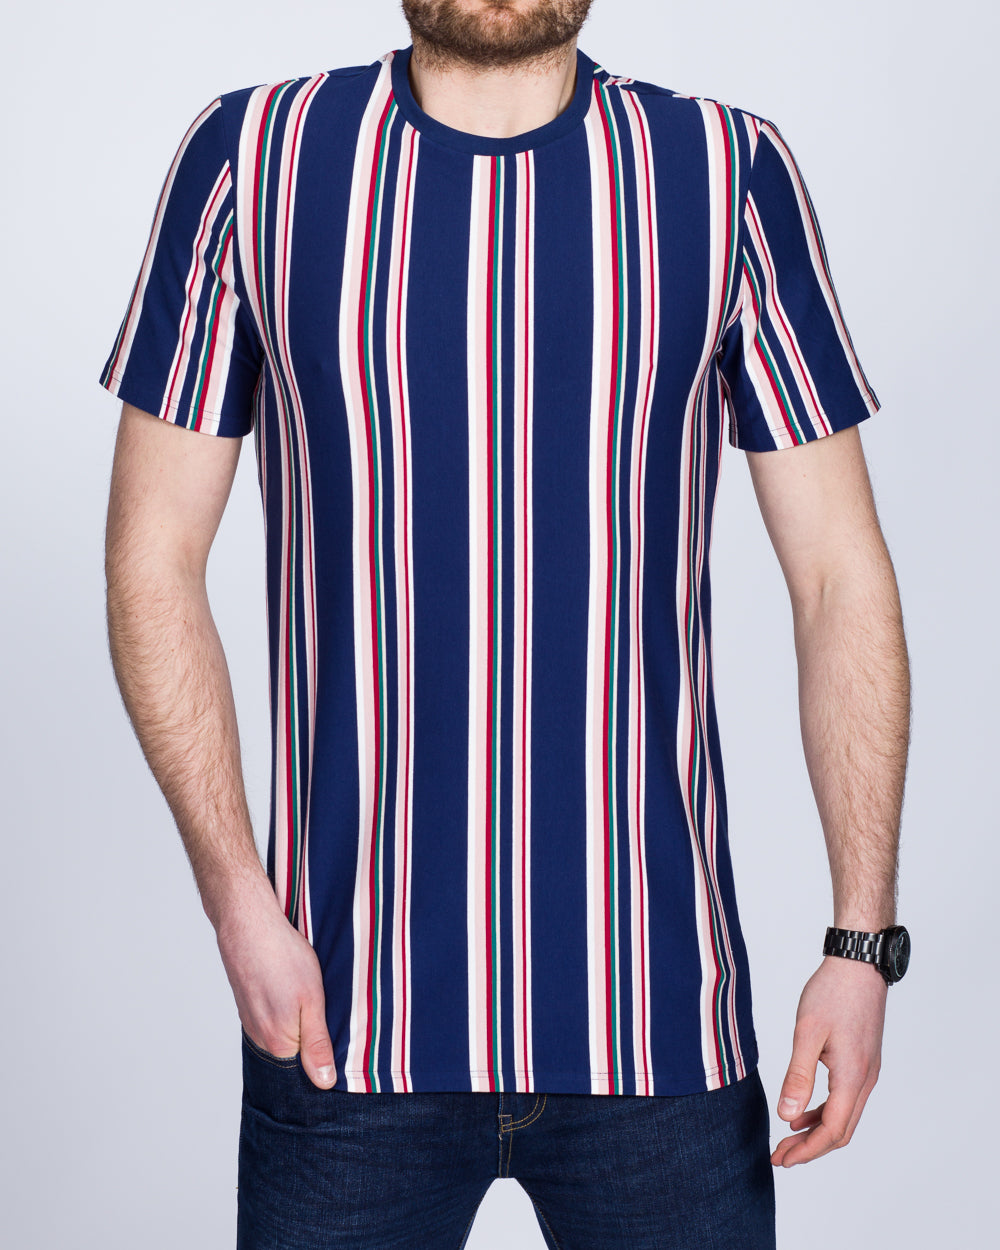 2t Tall Striped T-Shirt (navy/red)